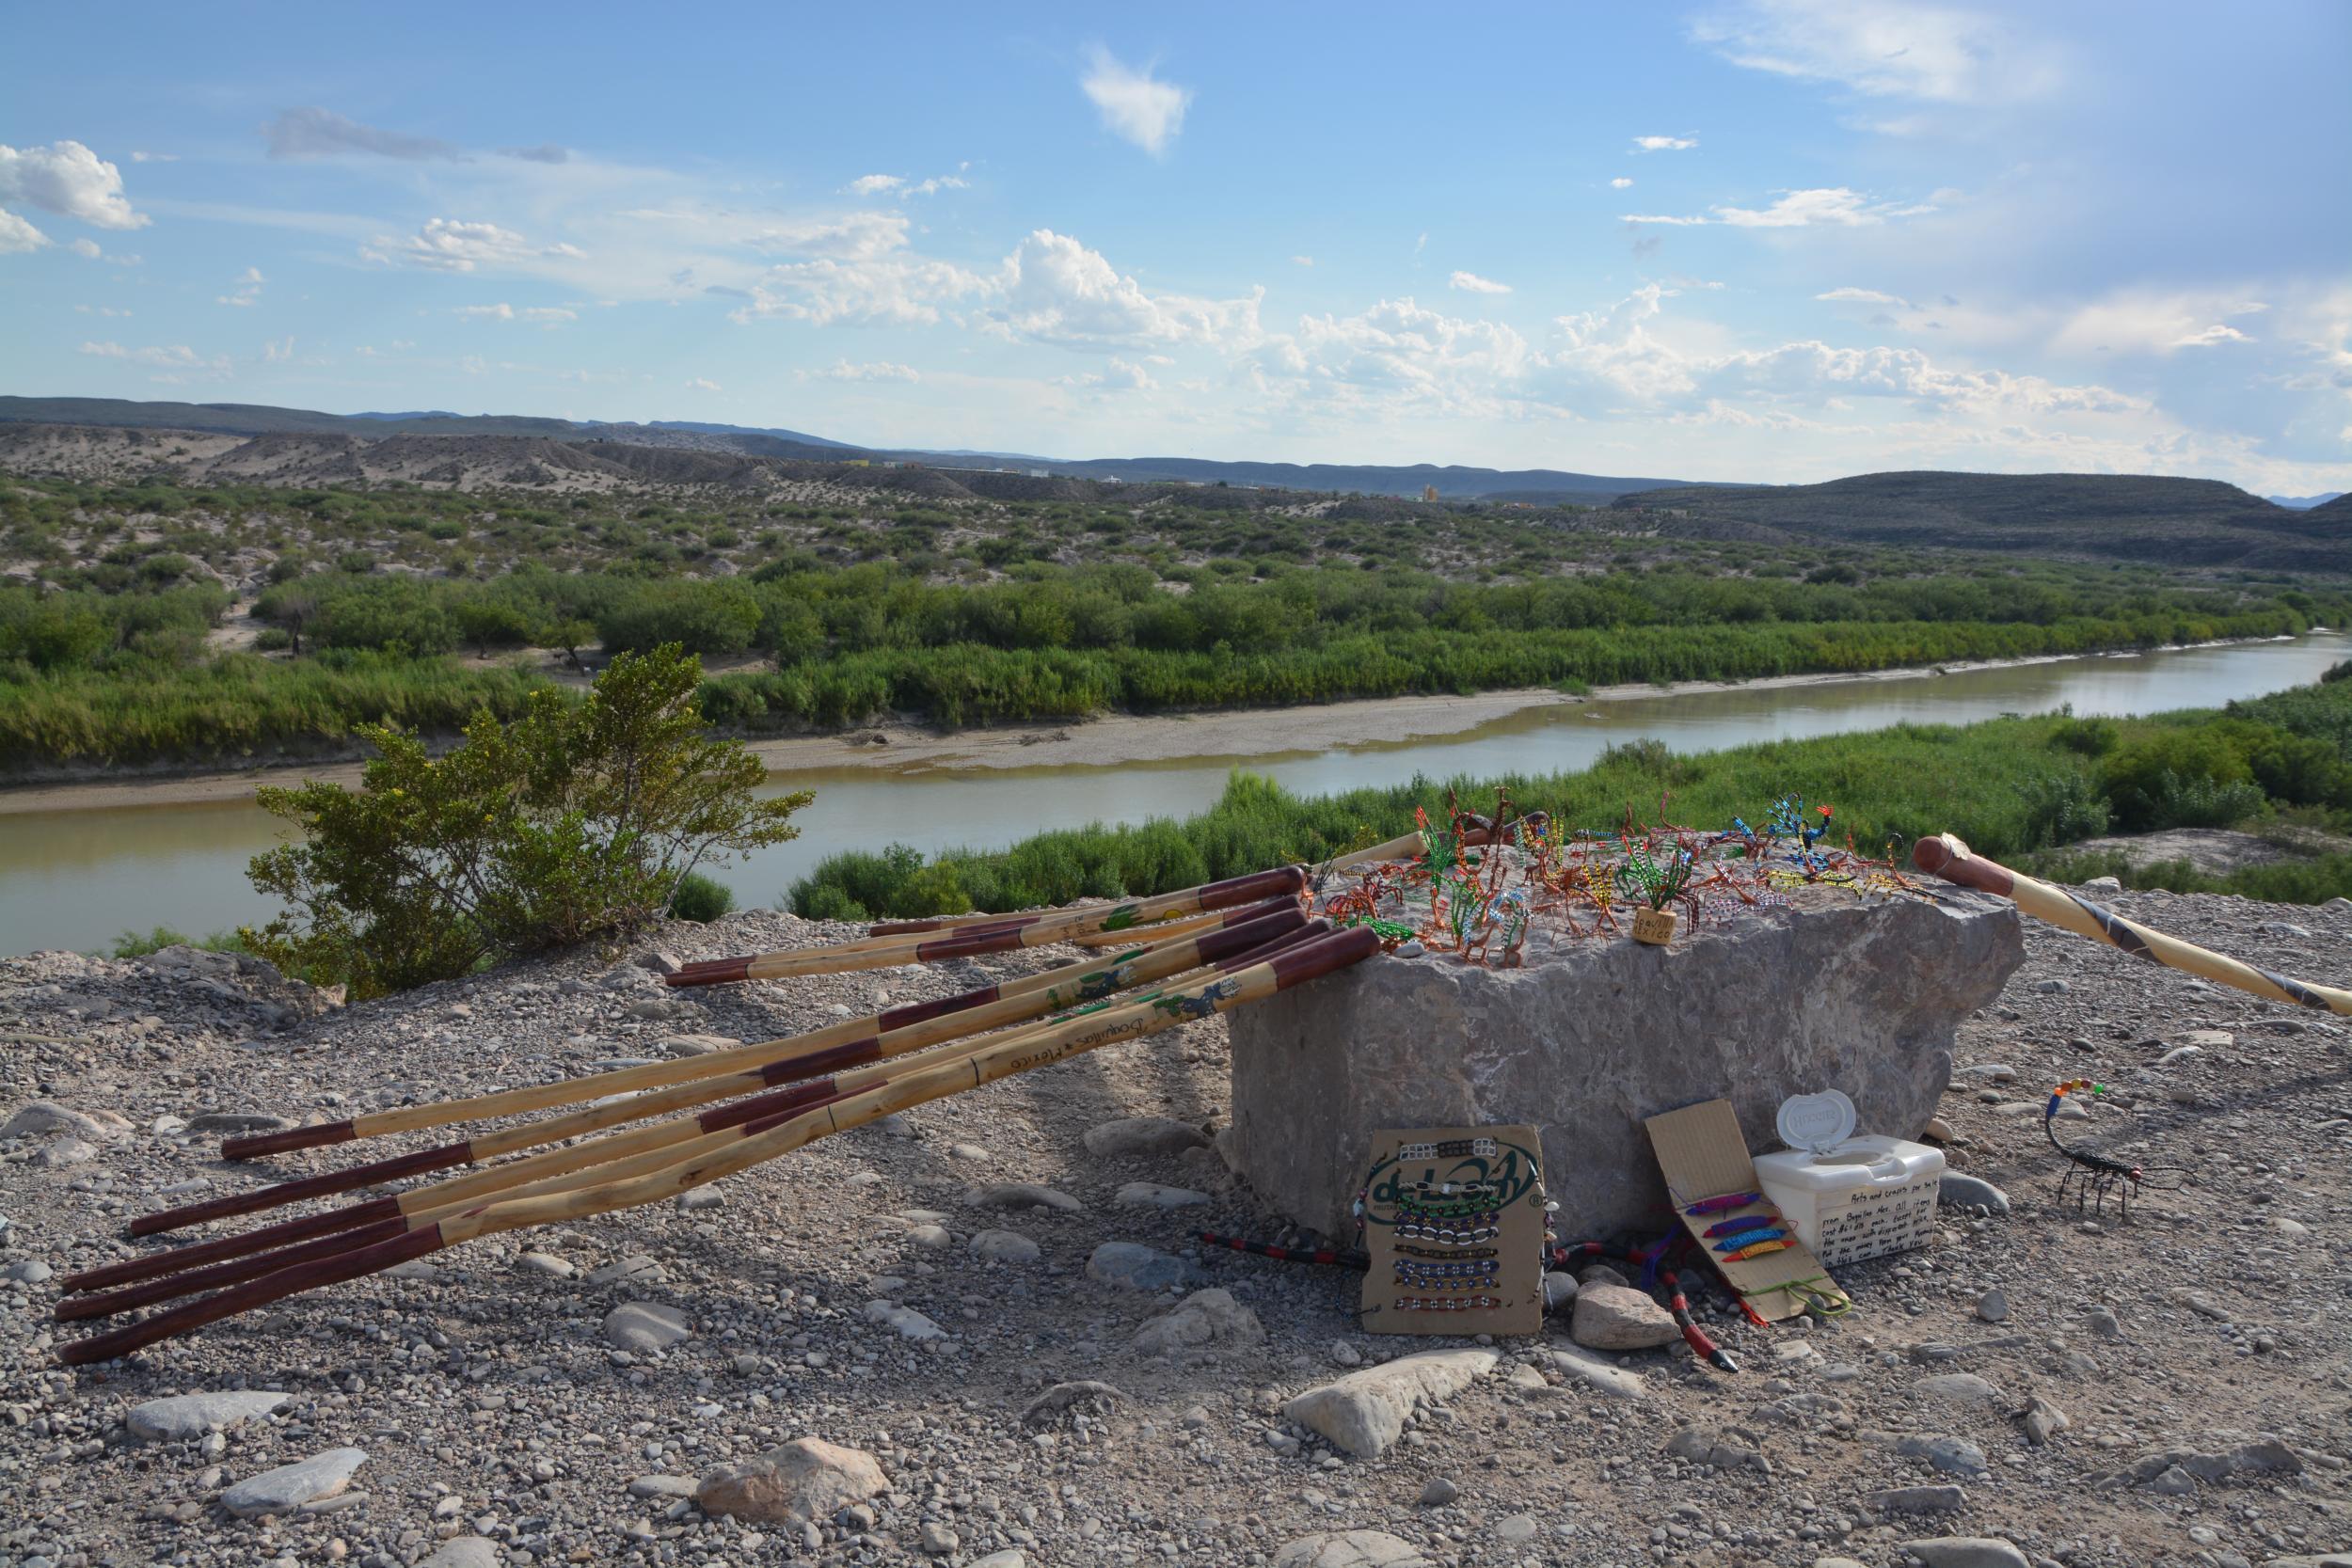 The overlook across the Rio Grande, where passport-less Americans can buy Mexican trinkets